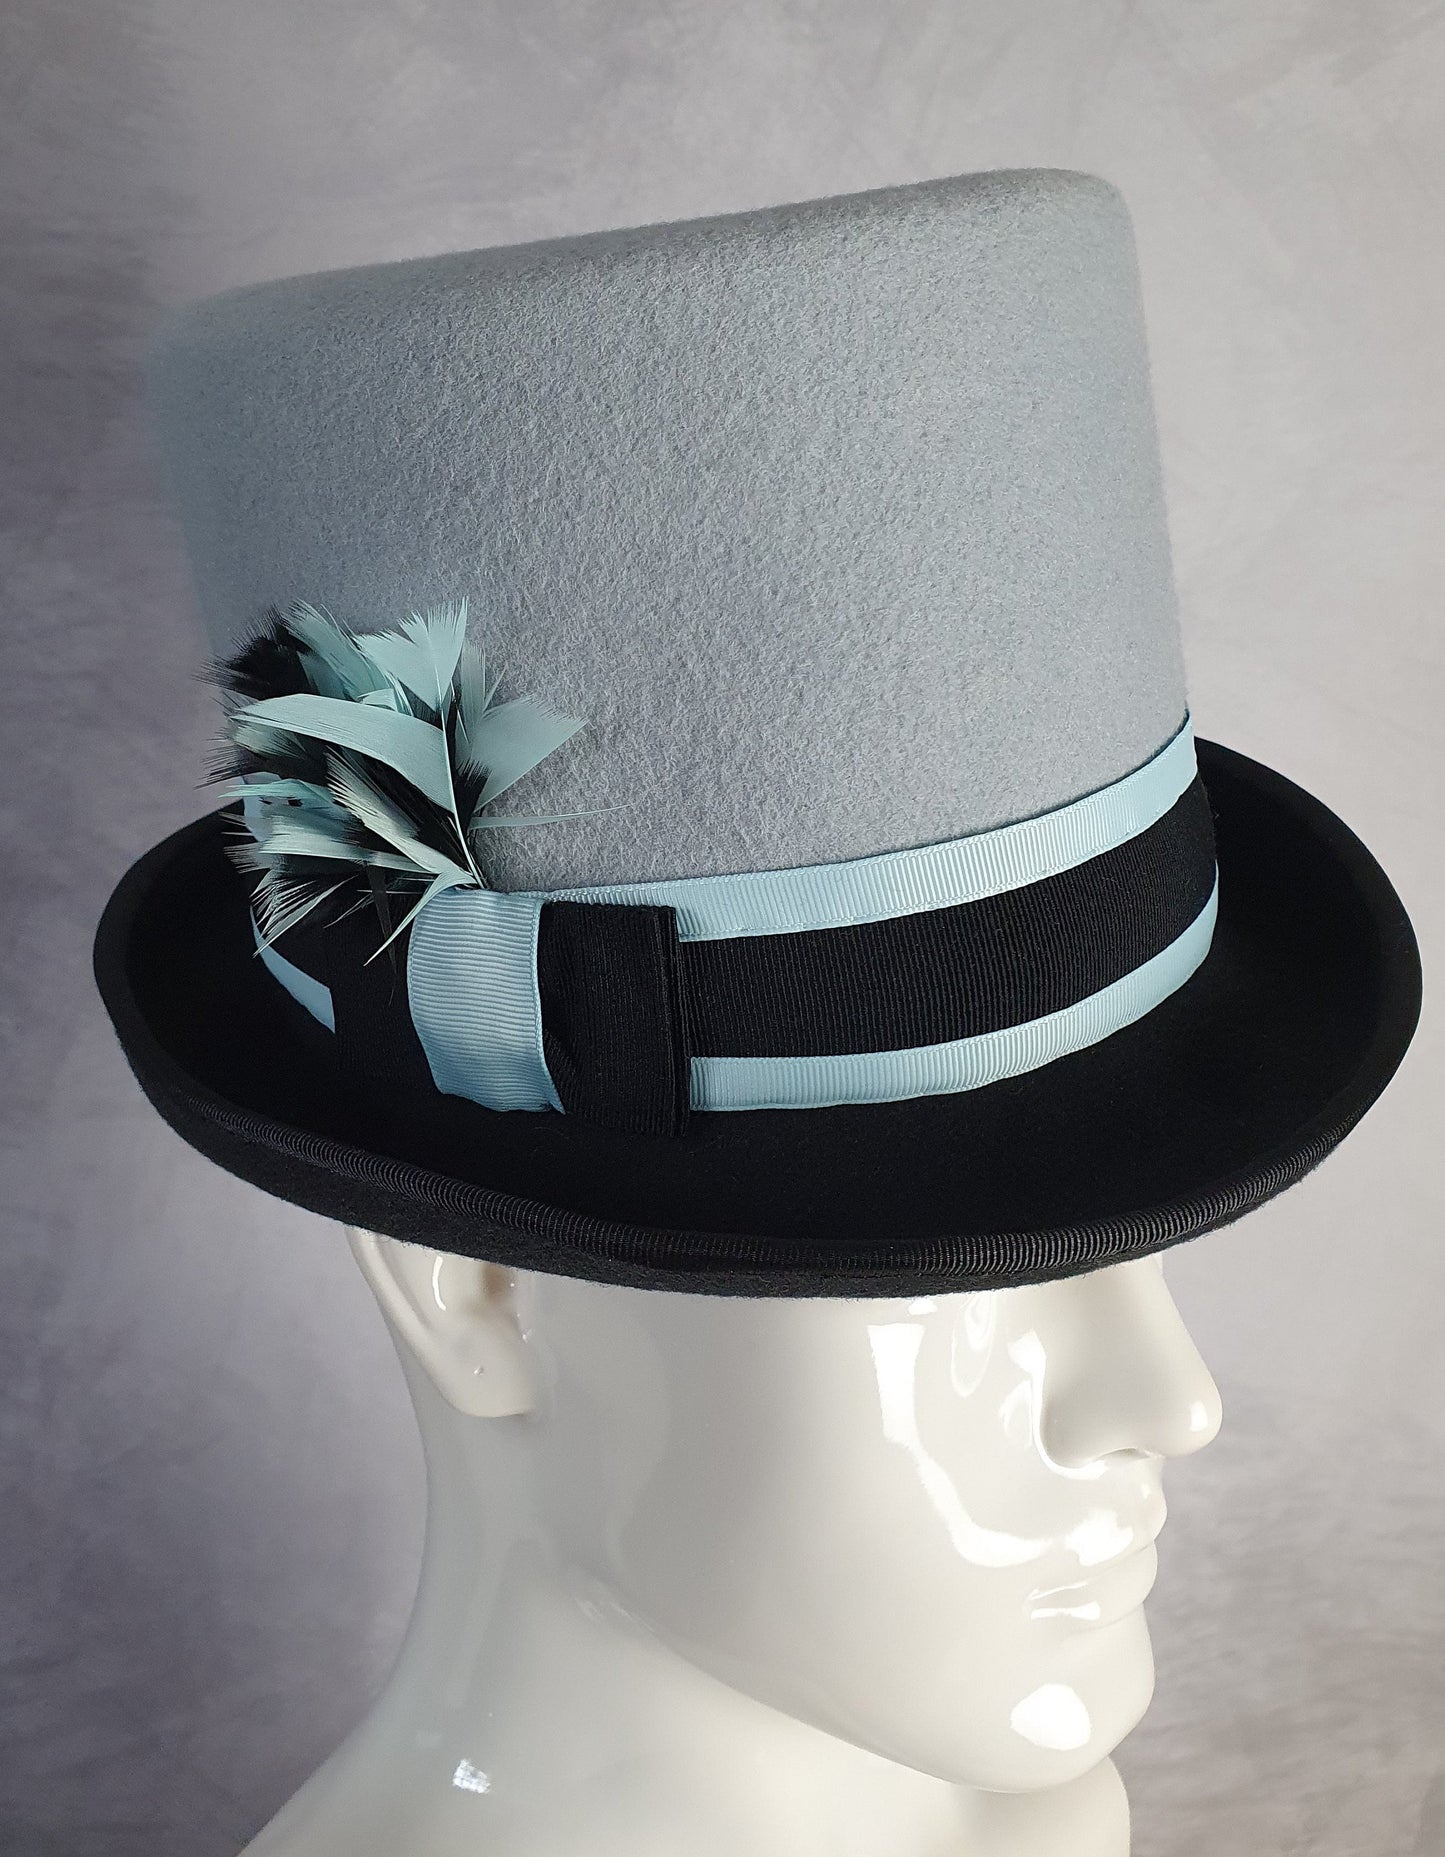 Handmade felt hat with pheasant feathers, blue with dark gray top hat, unisex hat, Victorian hat - perfect for special occasions